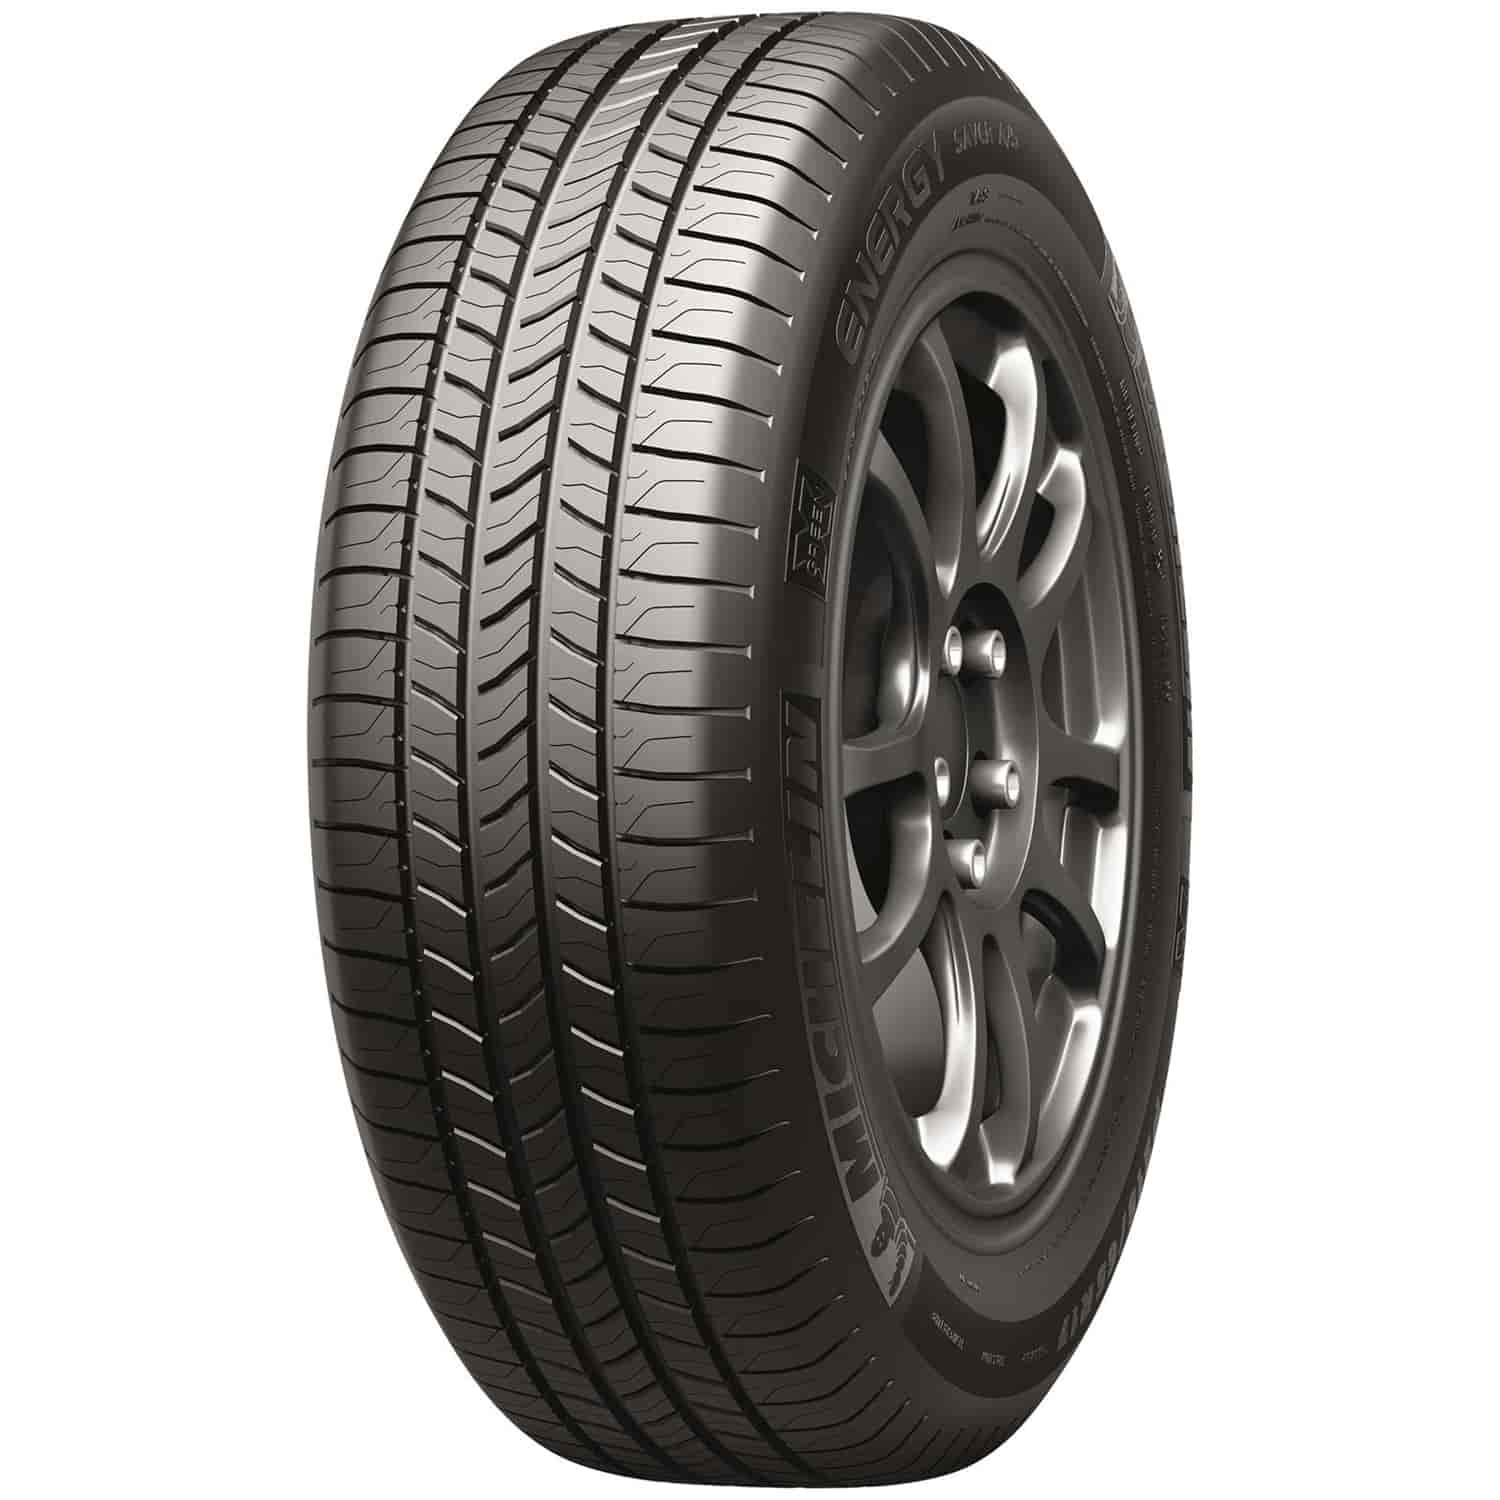 Energy Saver A/S P215/65R17 98T BSW